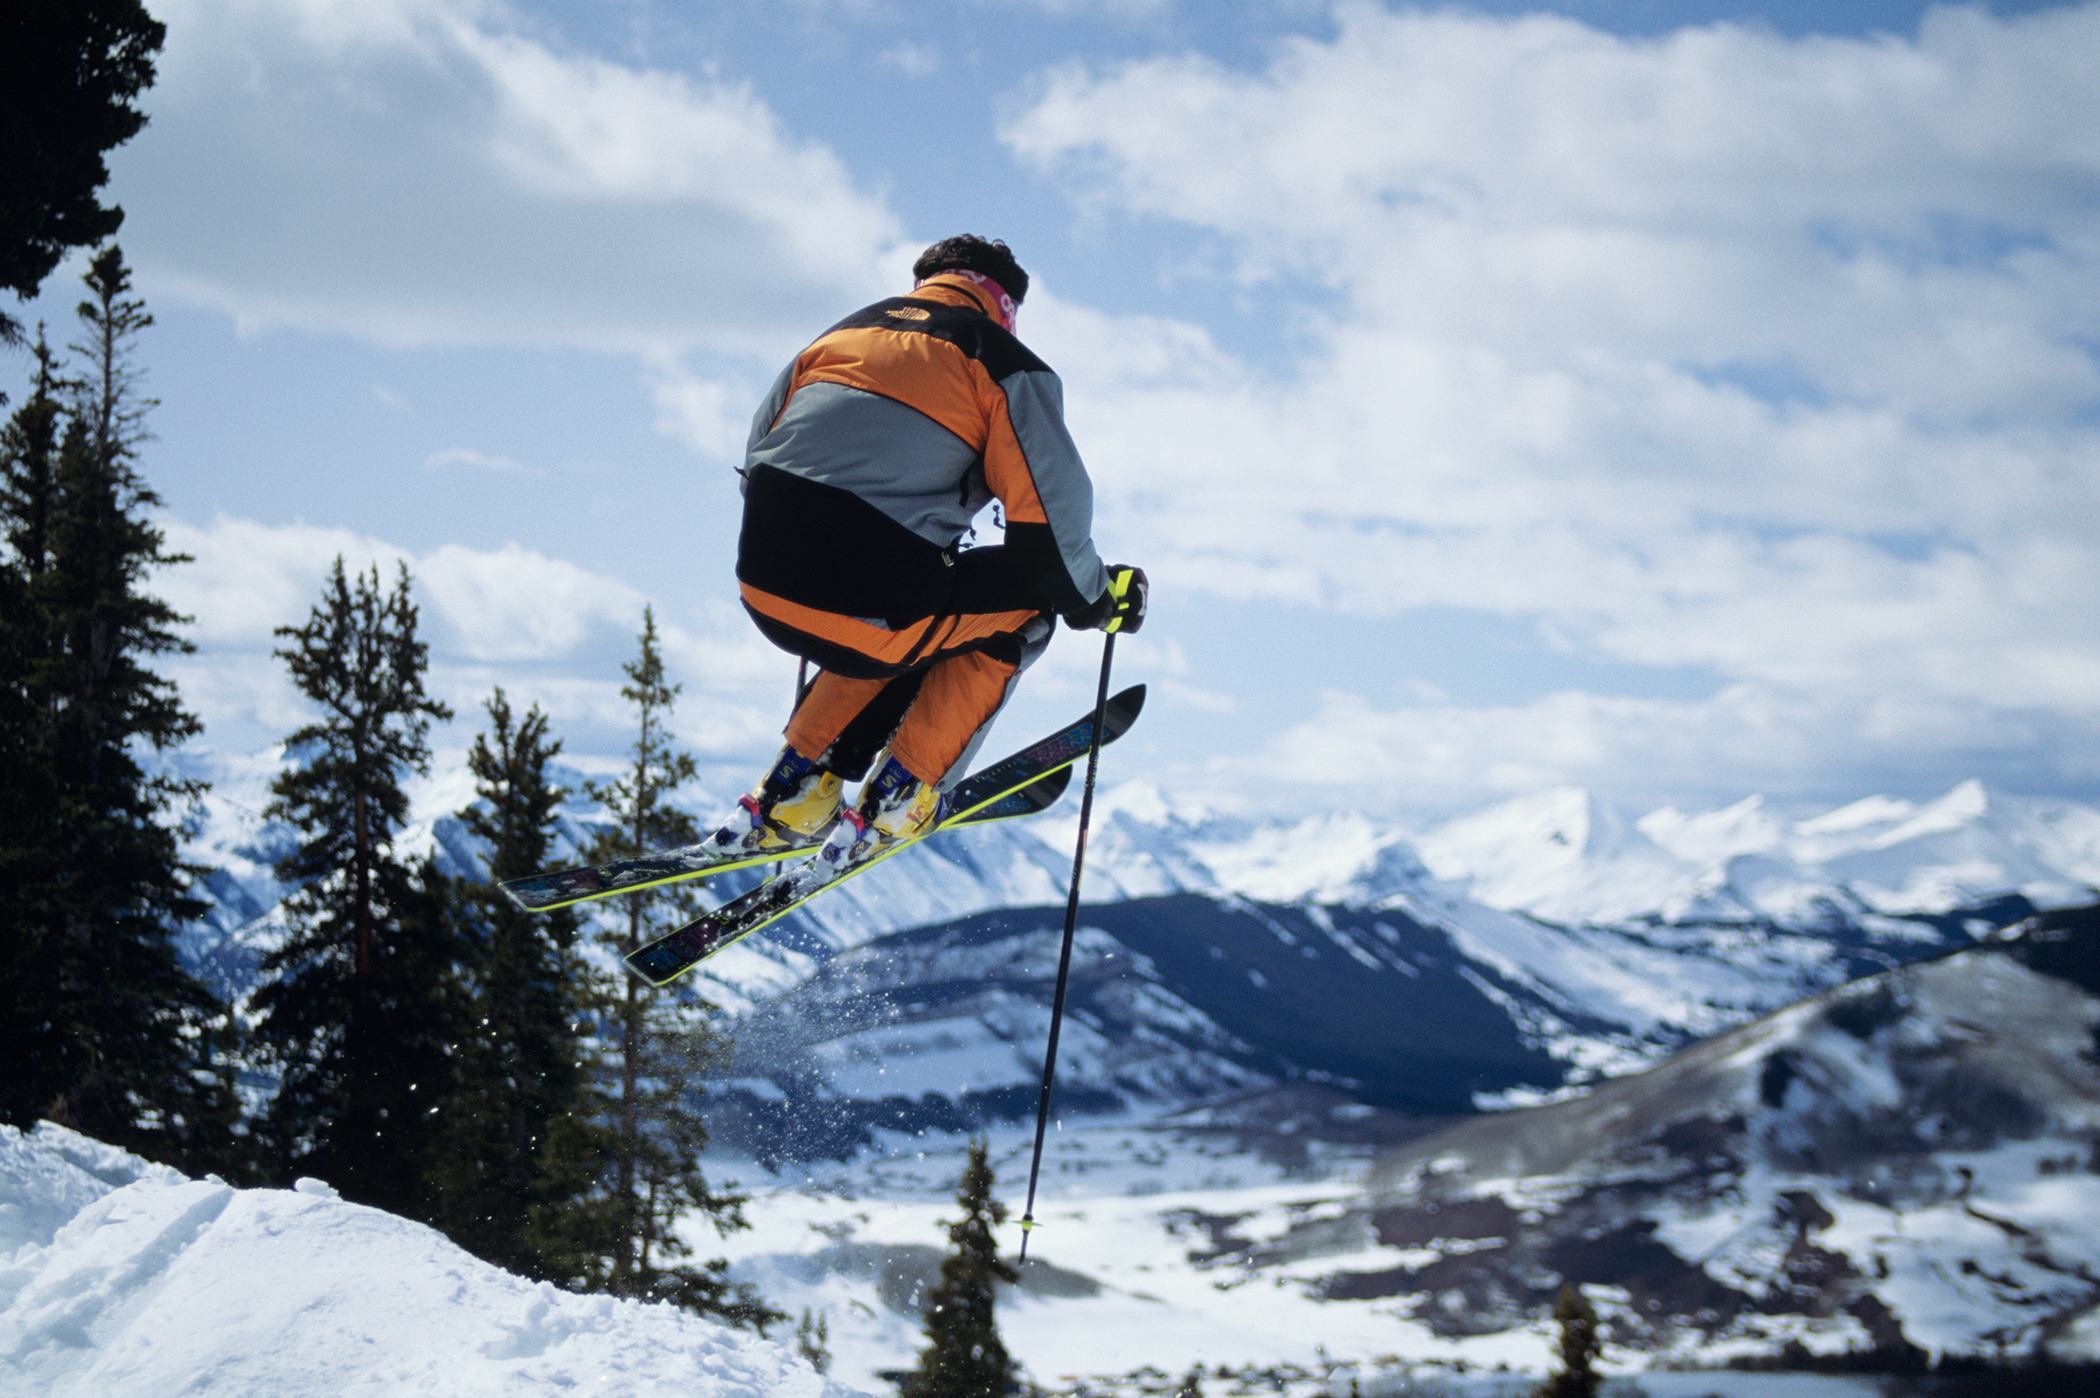 Skier in mid-air, Crested Butte, Colorado